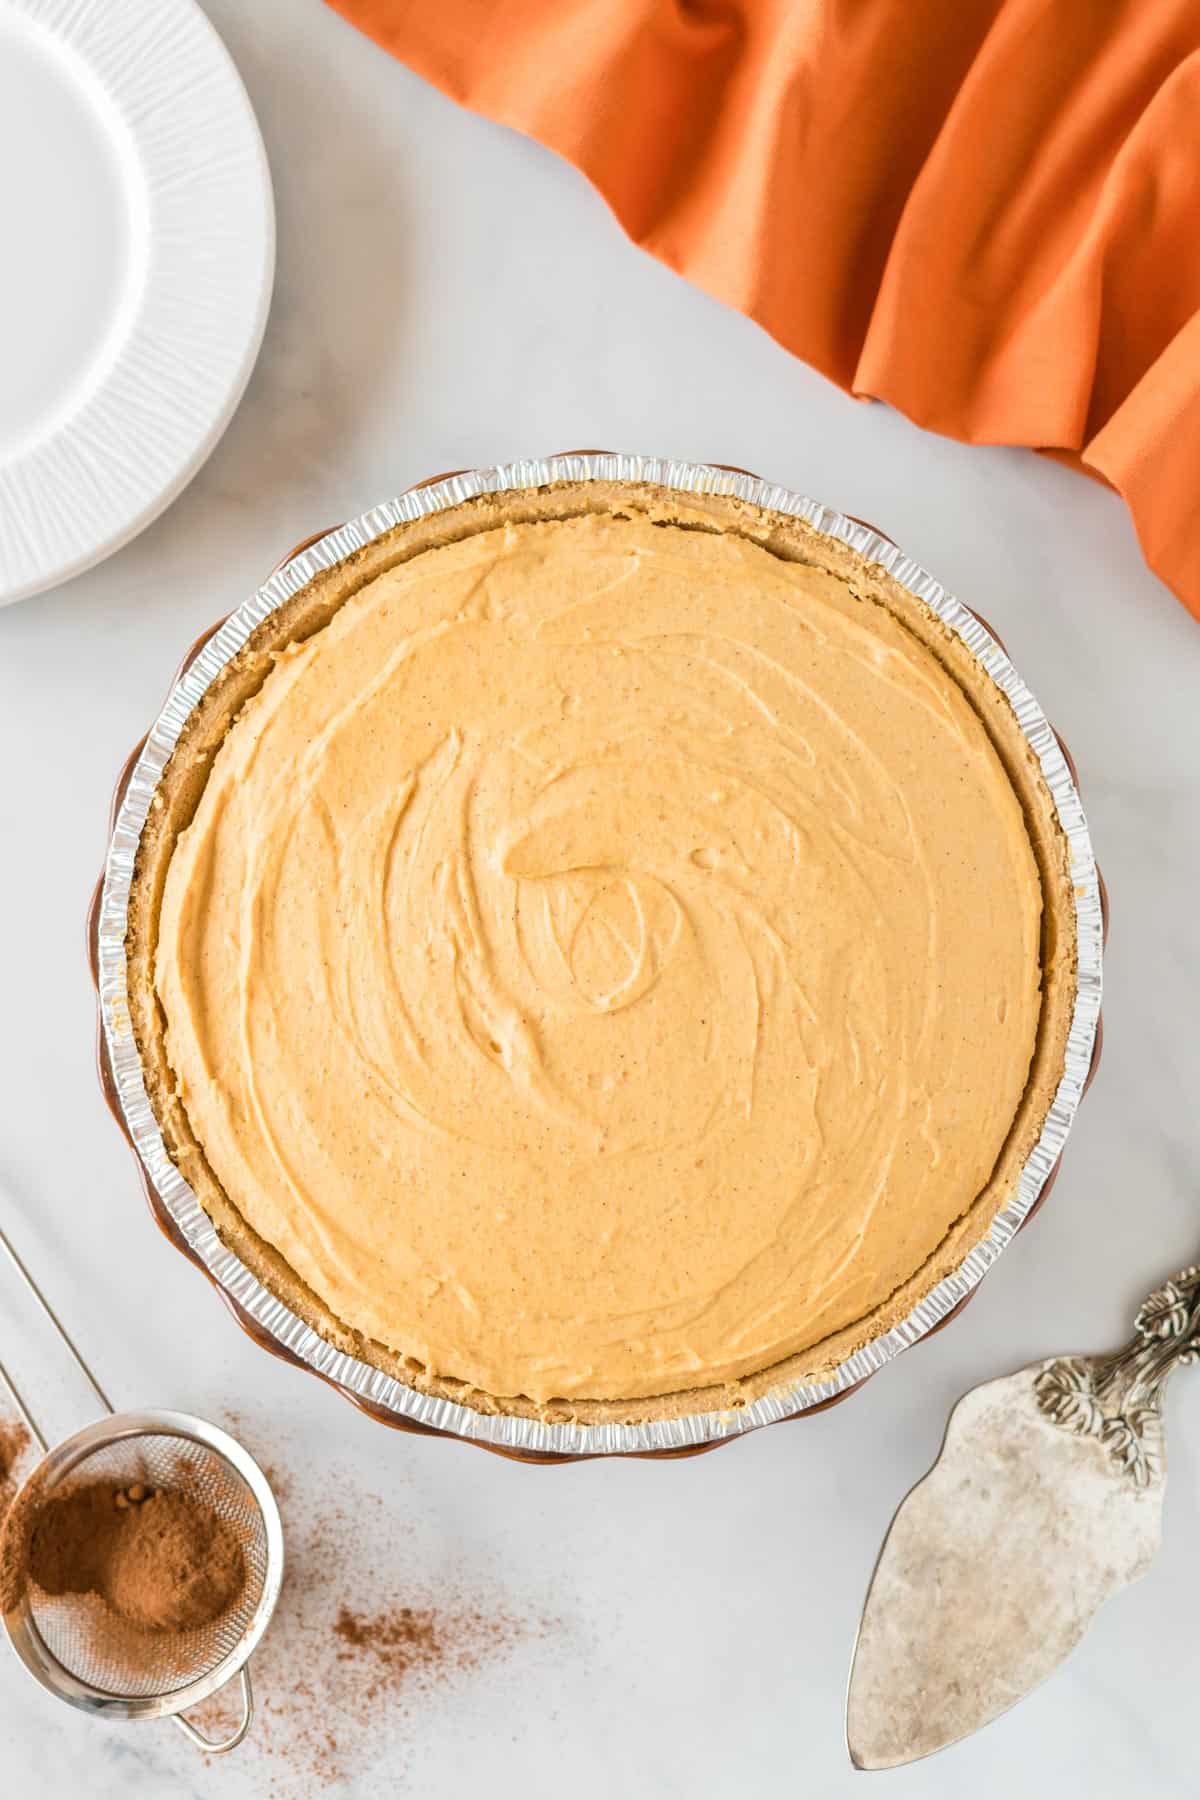 pumpkin pie filling smoothed out in the graham crust